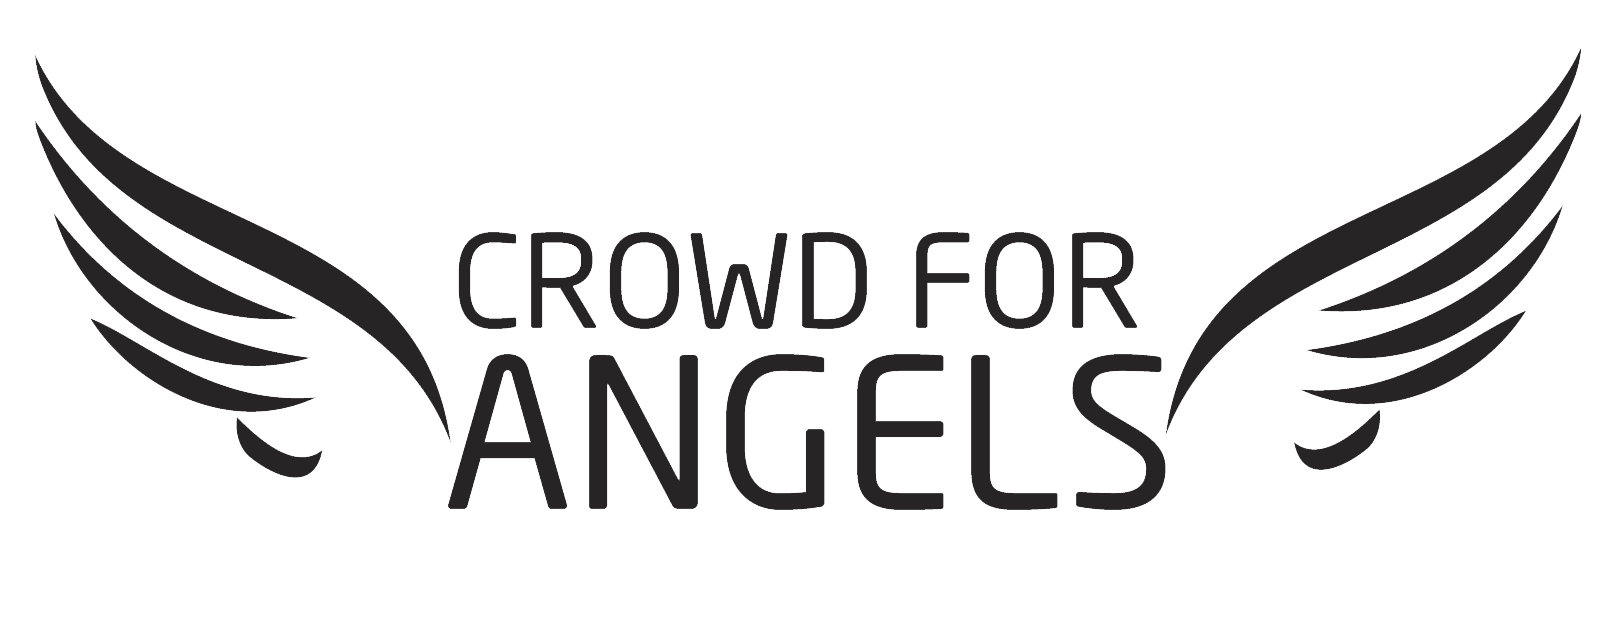 Crowd for Angels Resources - Crowd for Angels | Blog